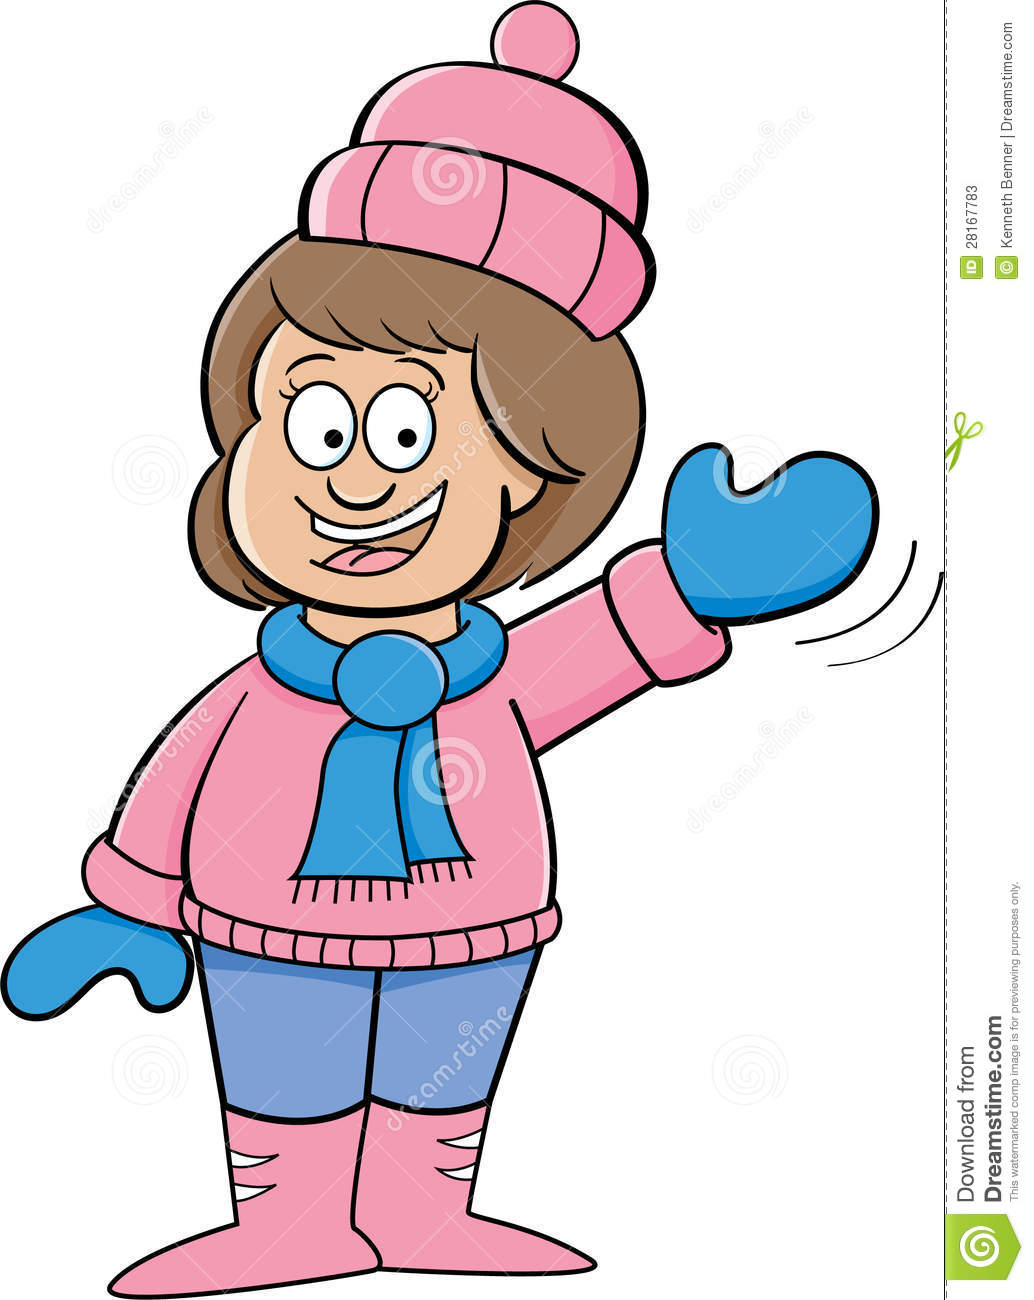 More Similar Stock Images Of   Cartoon Girl In Winter Clothes Waving